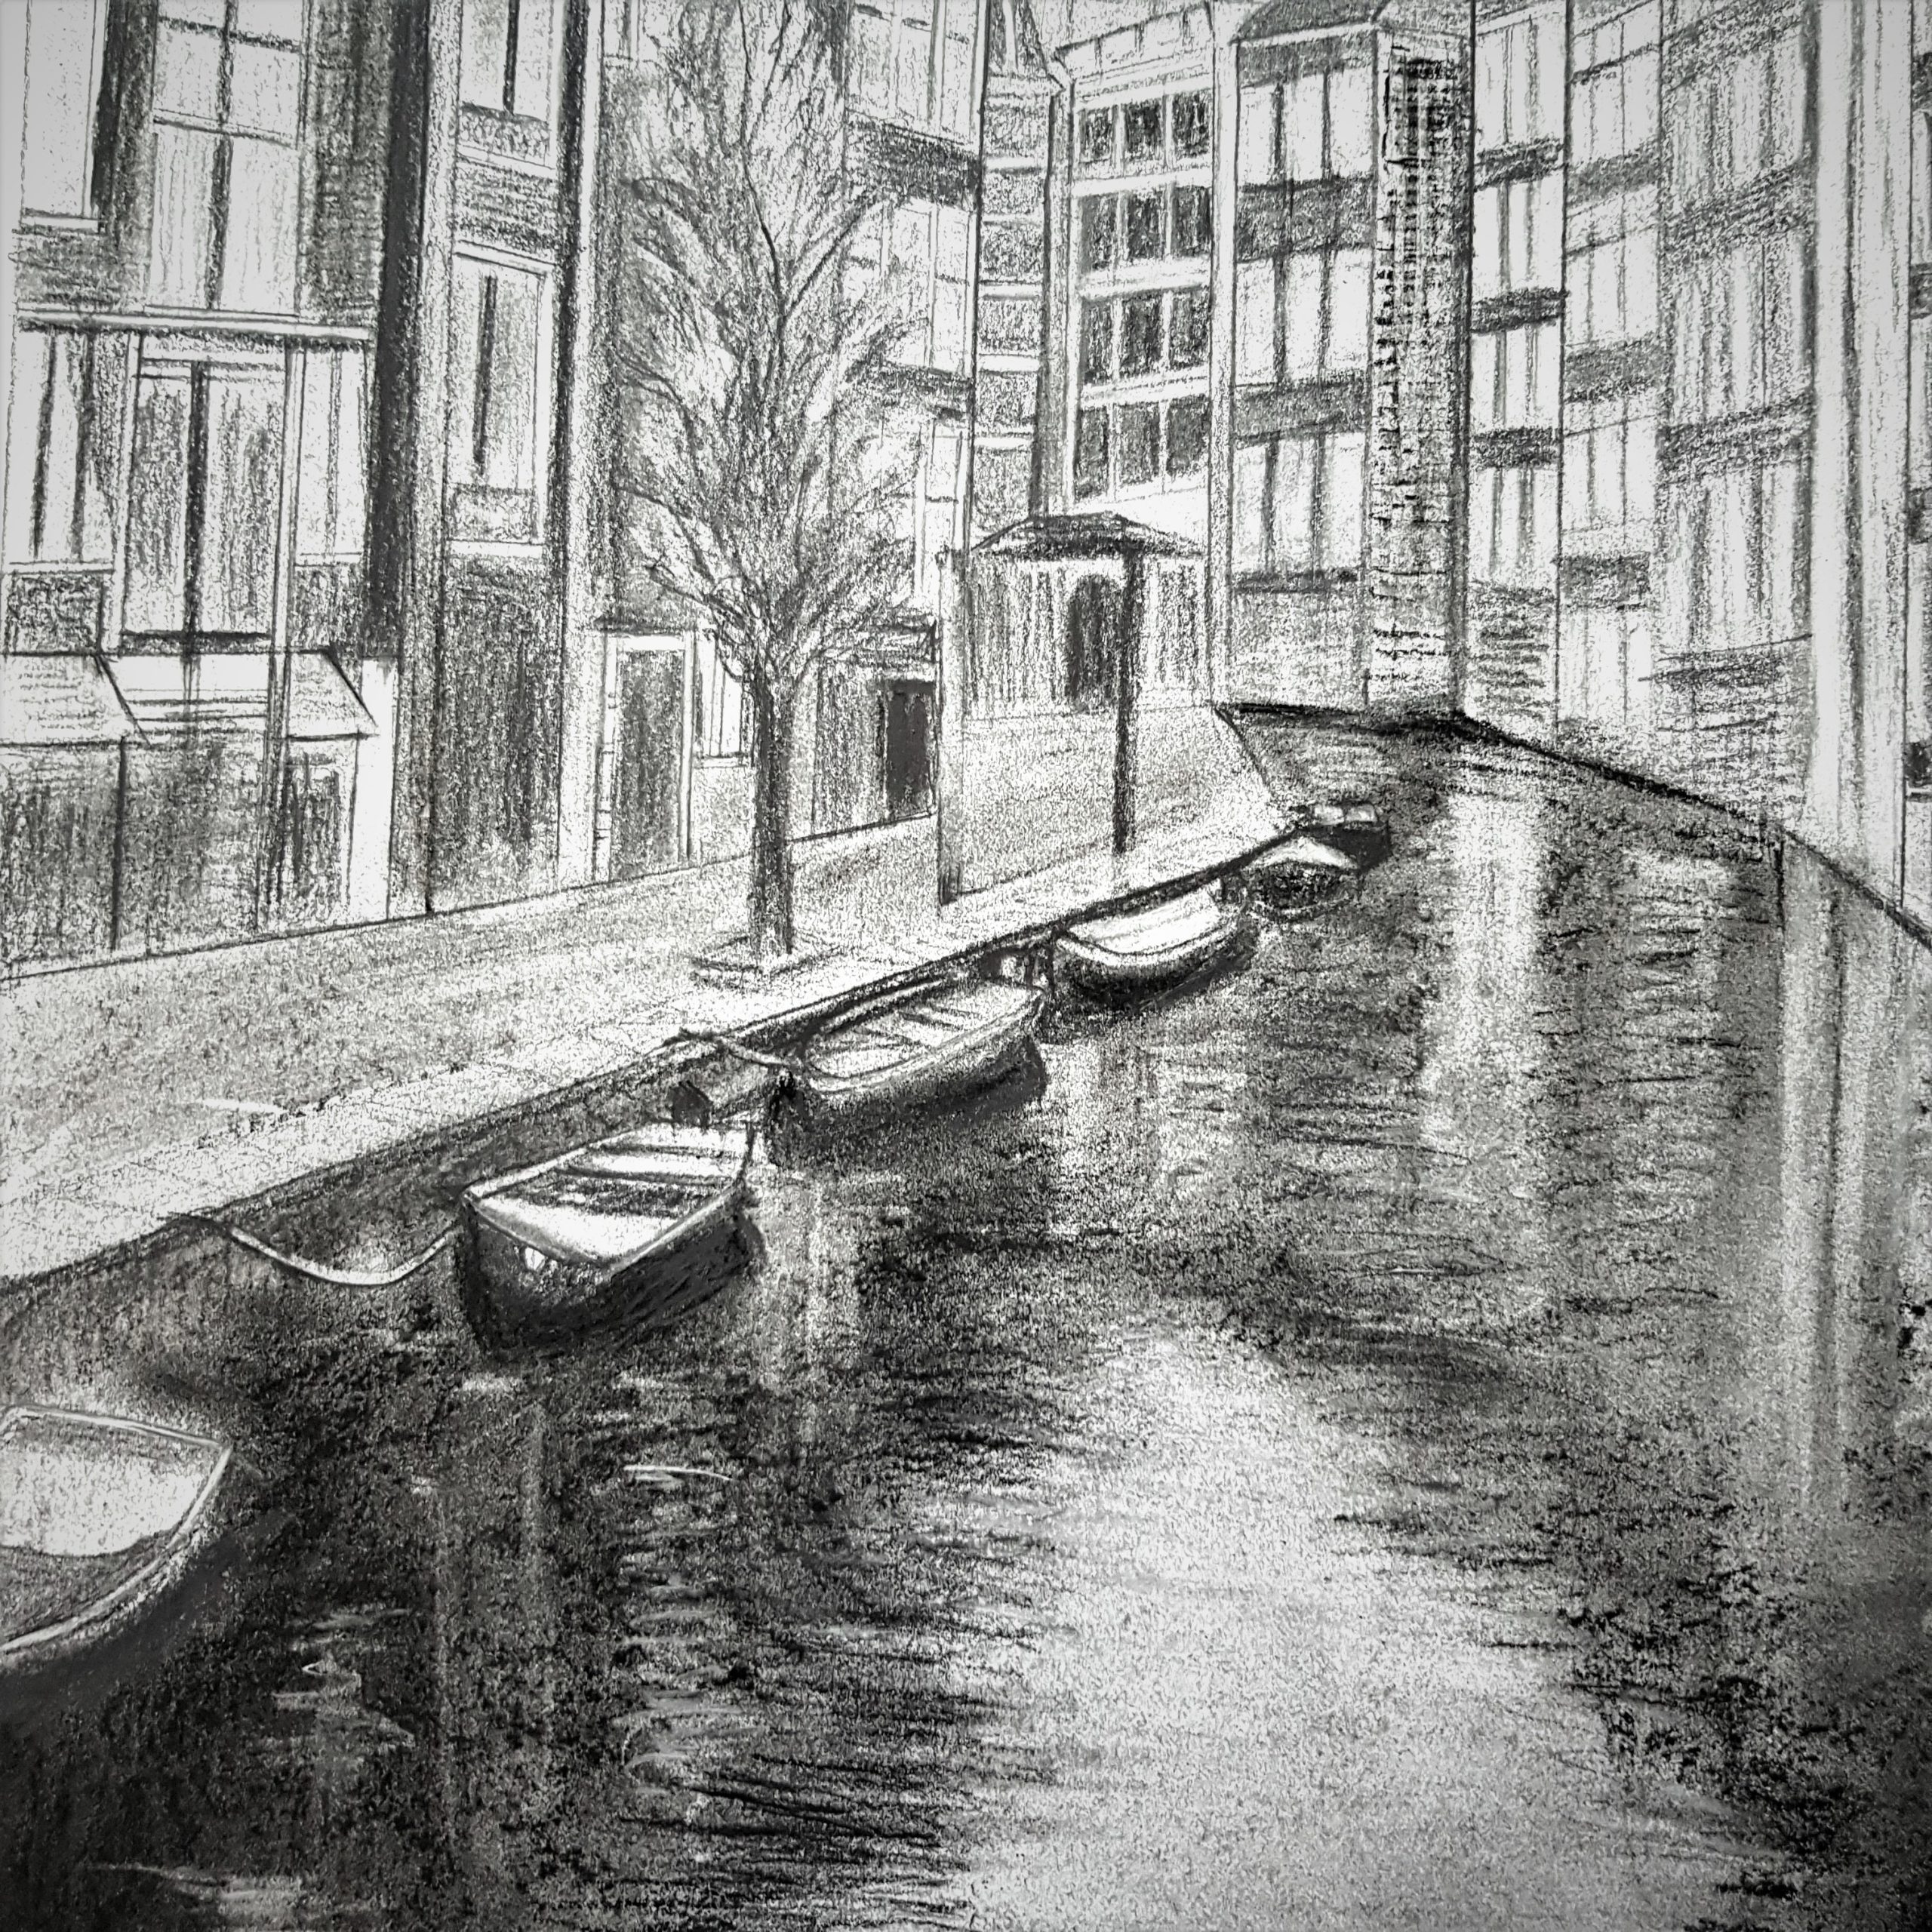 Cityscape Charcoal drawing